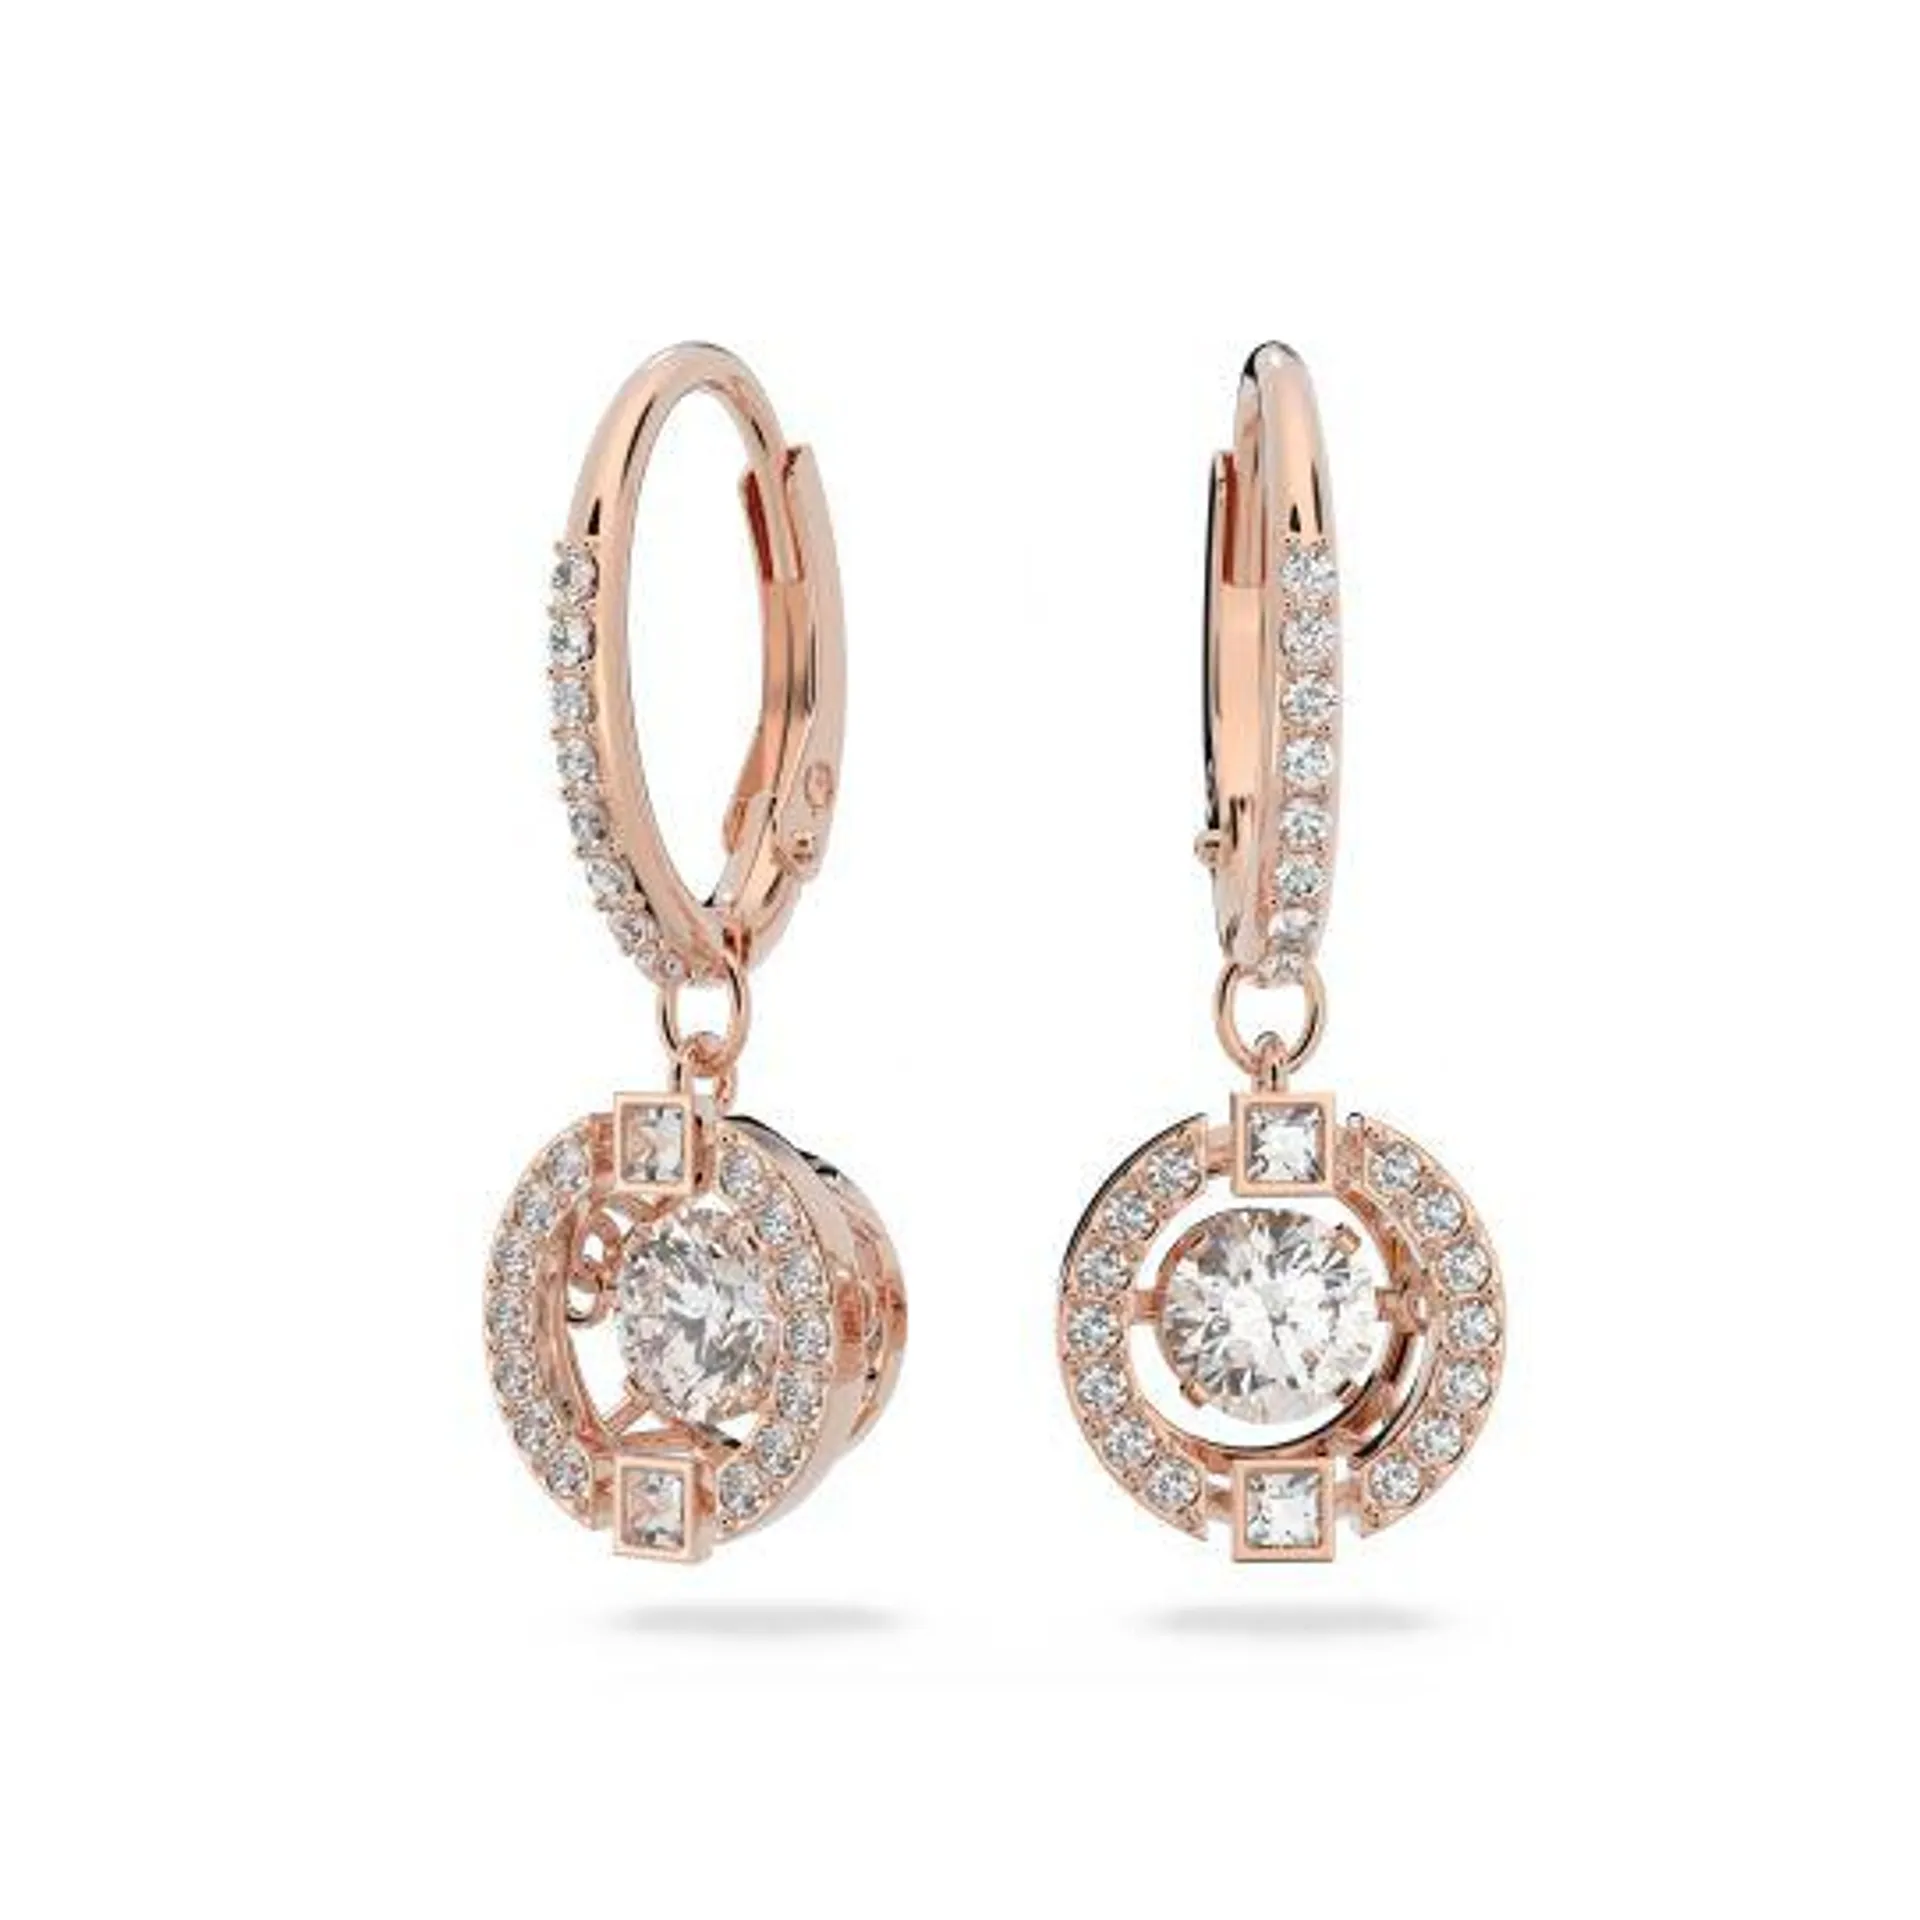 Sparkling Dc Lady Earrings Rose Gold White